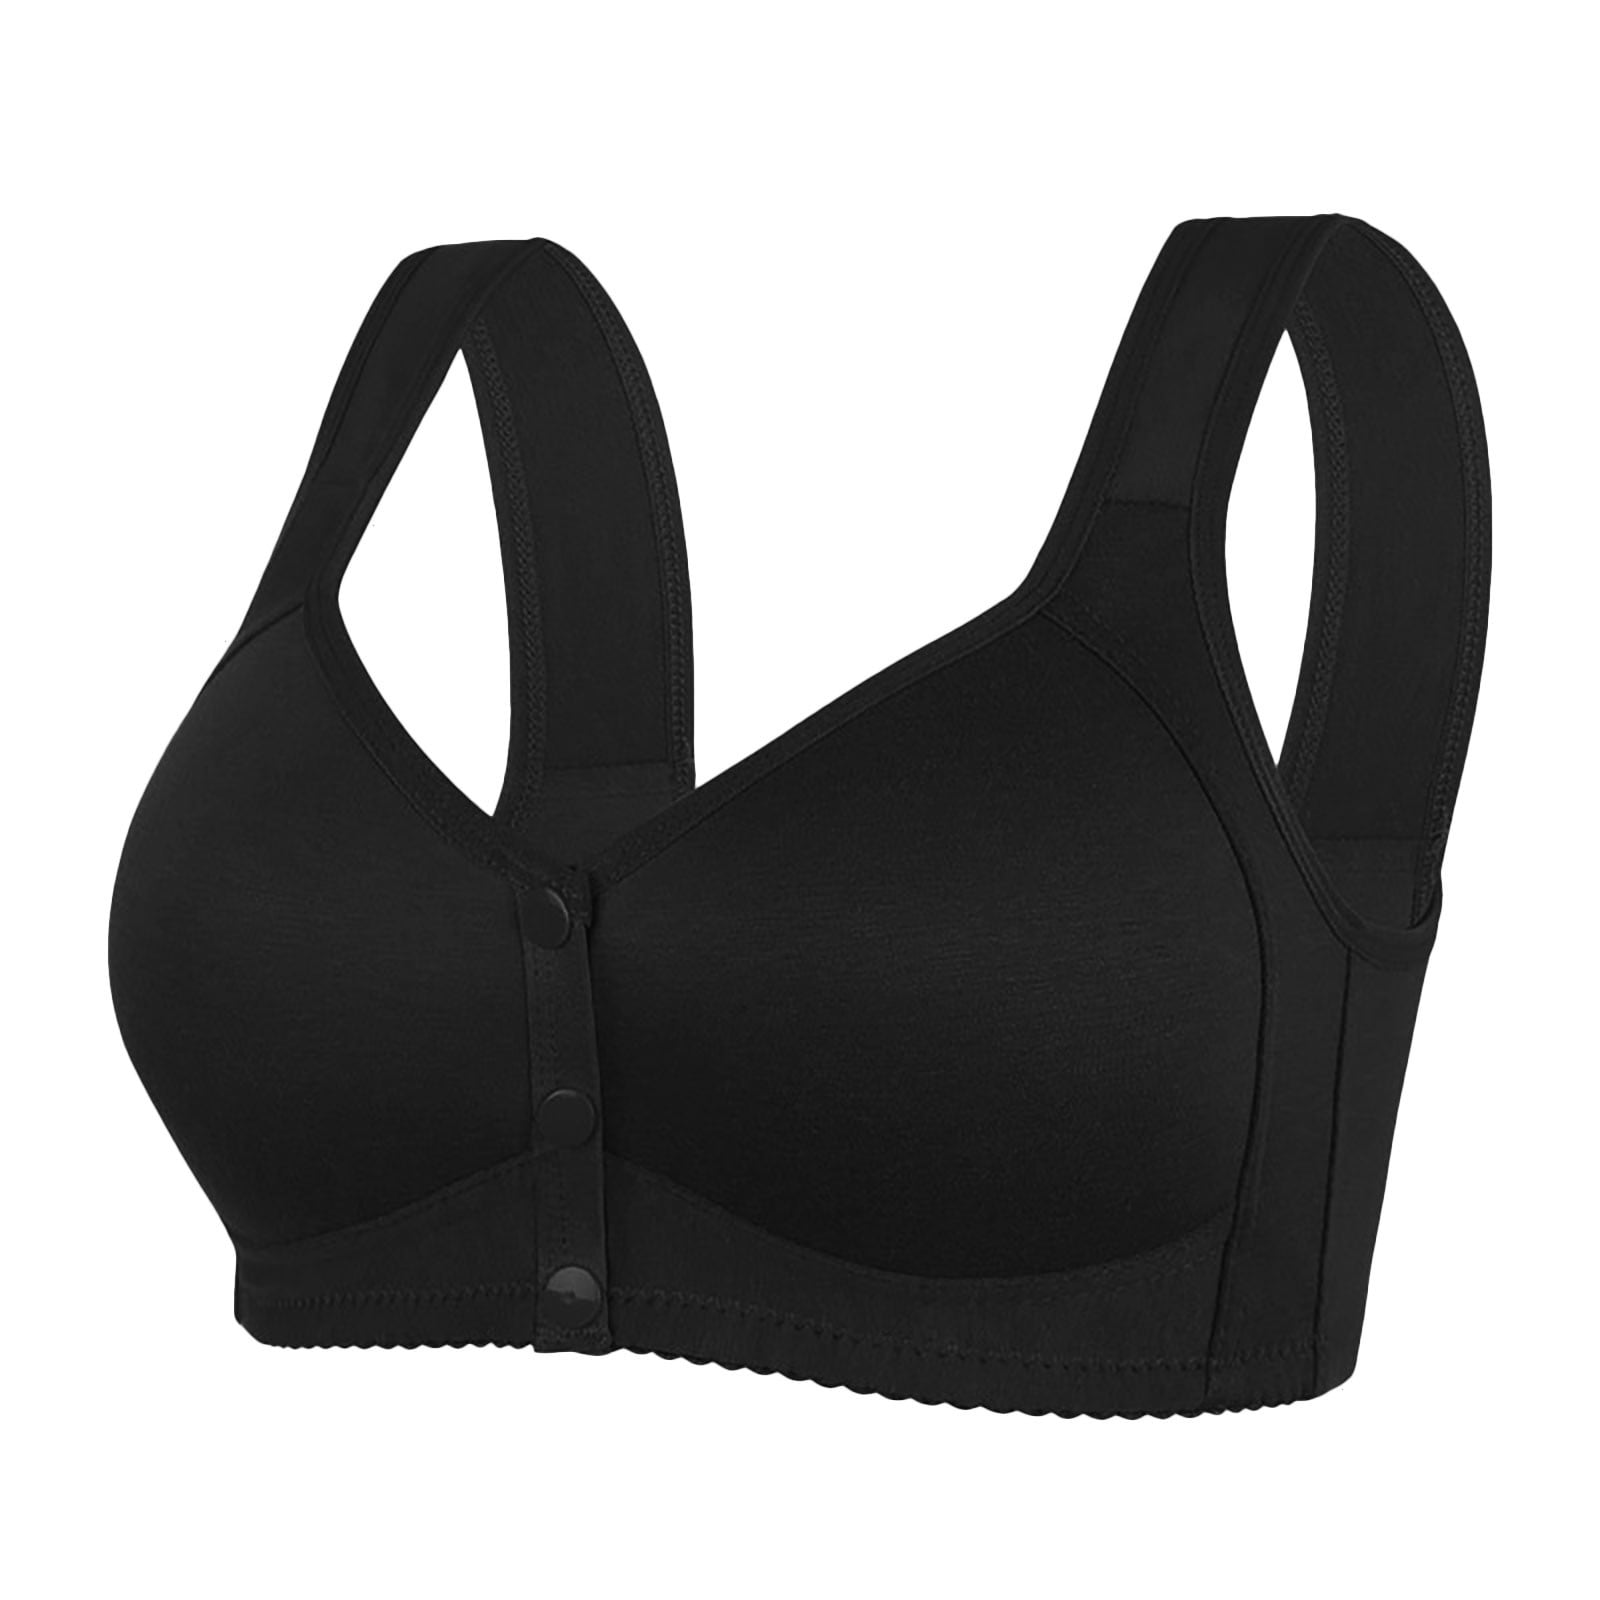 Stamzod Front Closure Bras For Women Large Sized, Seamless, Comfortable ...